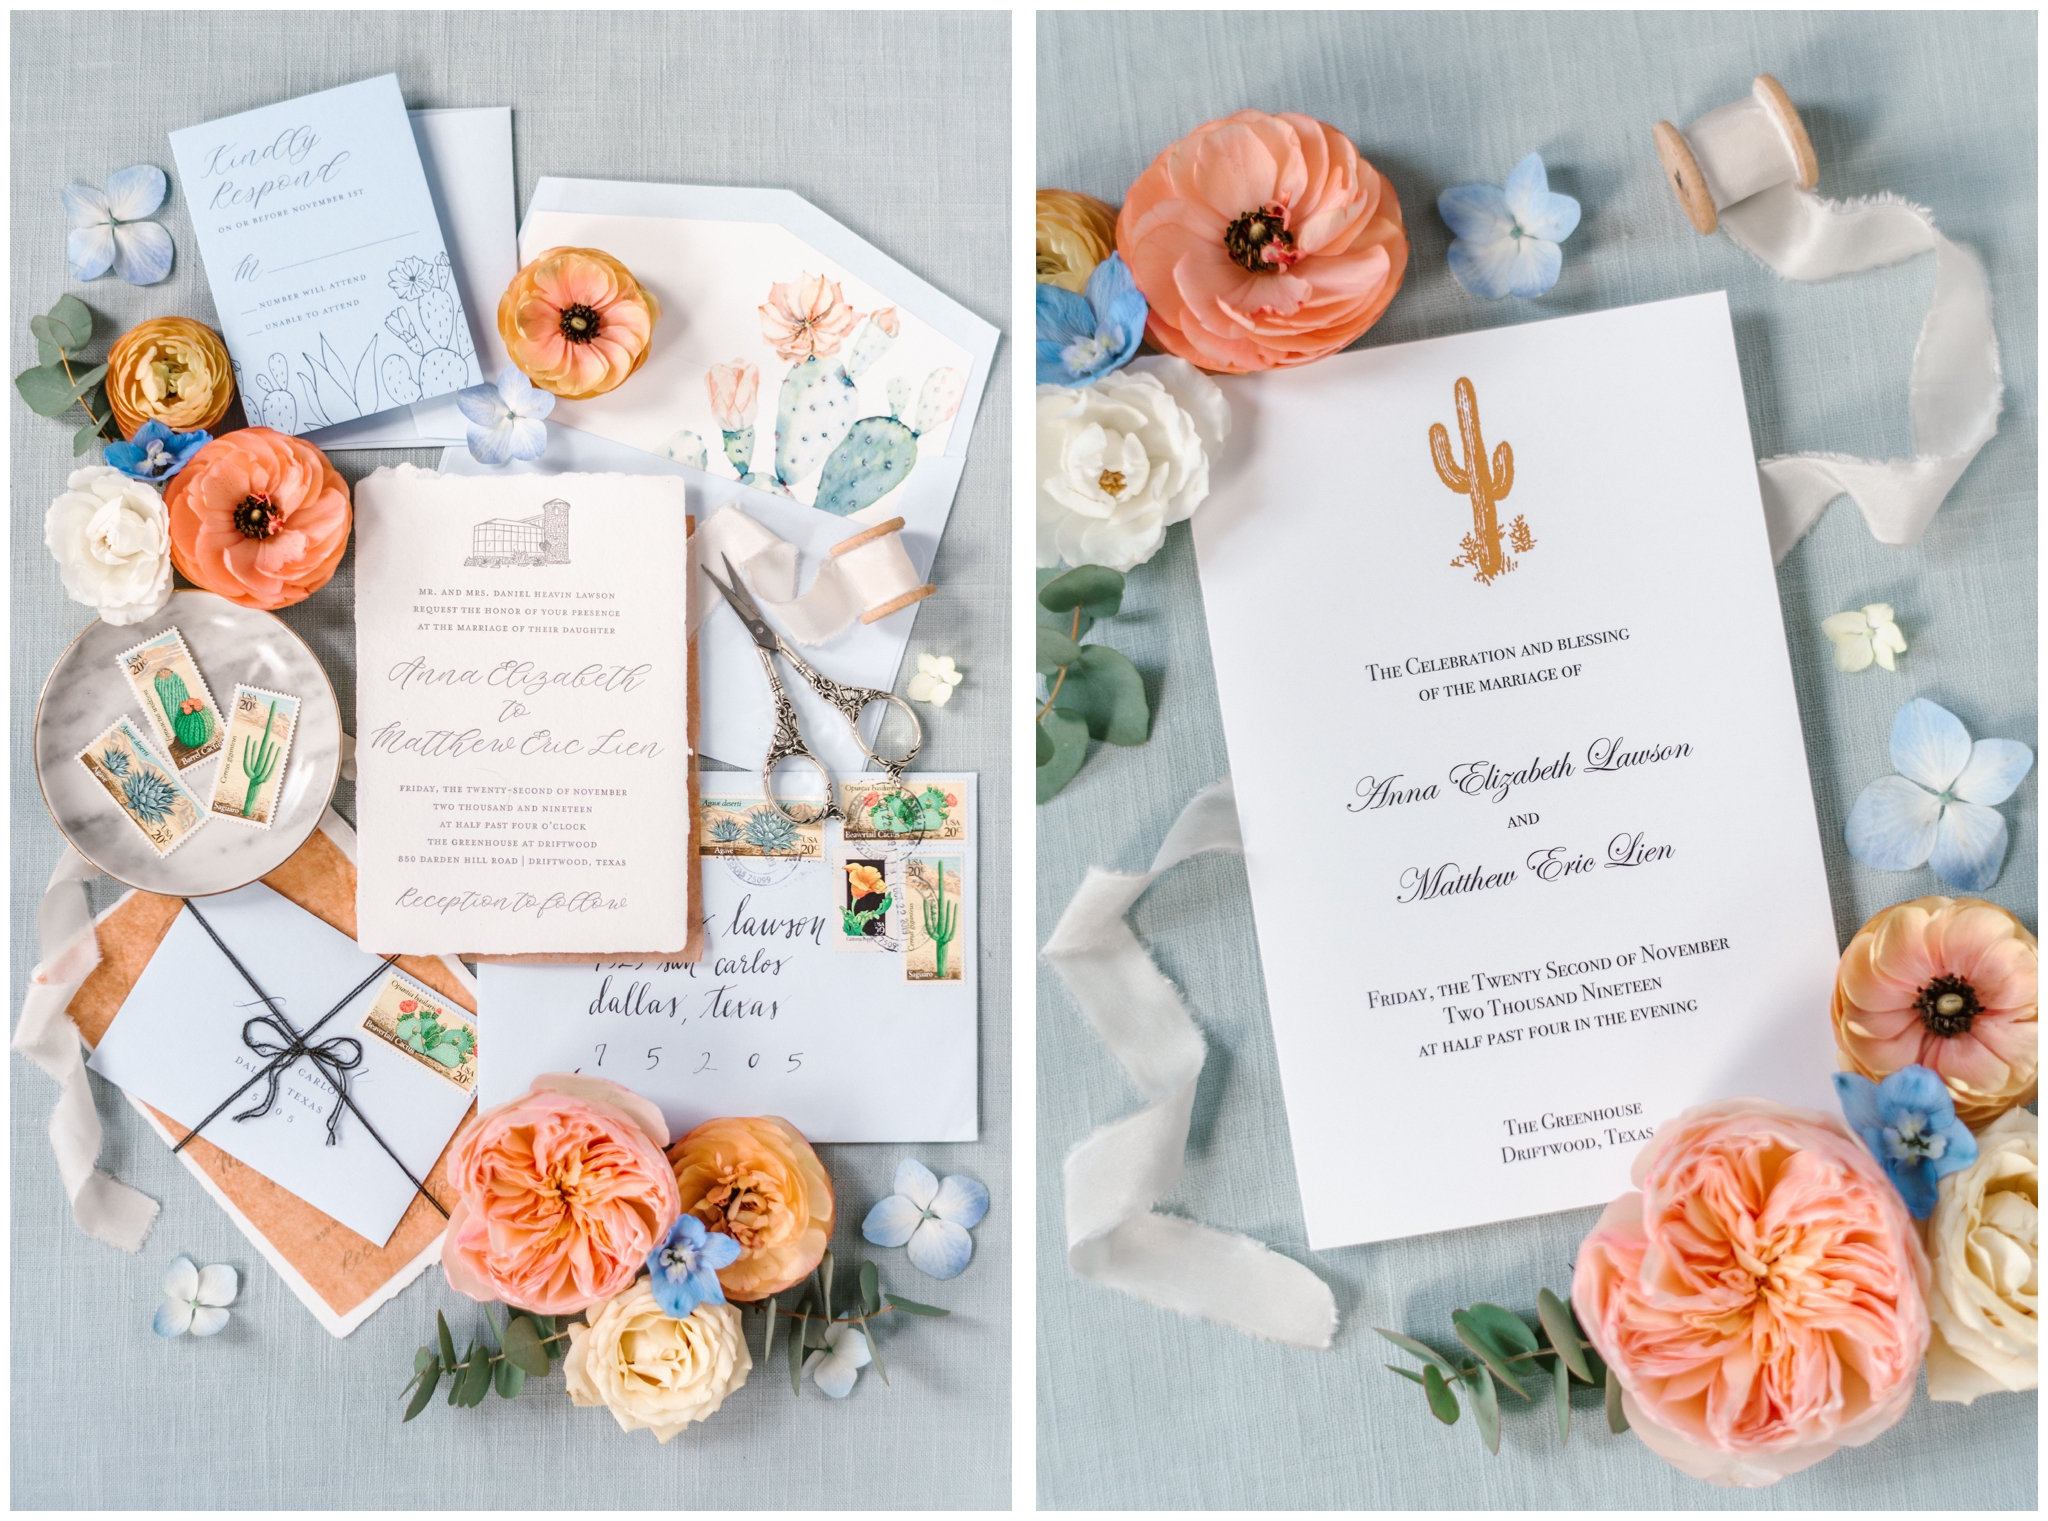 Colorful cacti wedding stationary by Peach Paper + Design | Joslyn Holtfort Photography